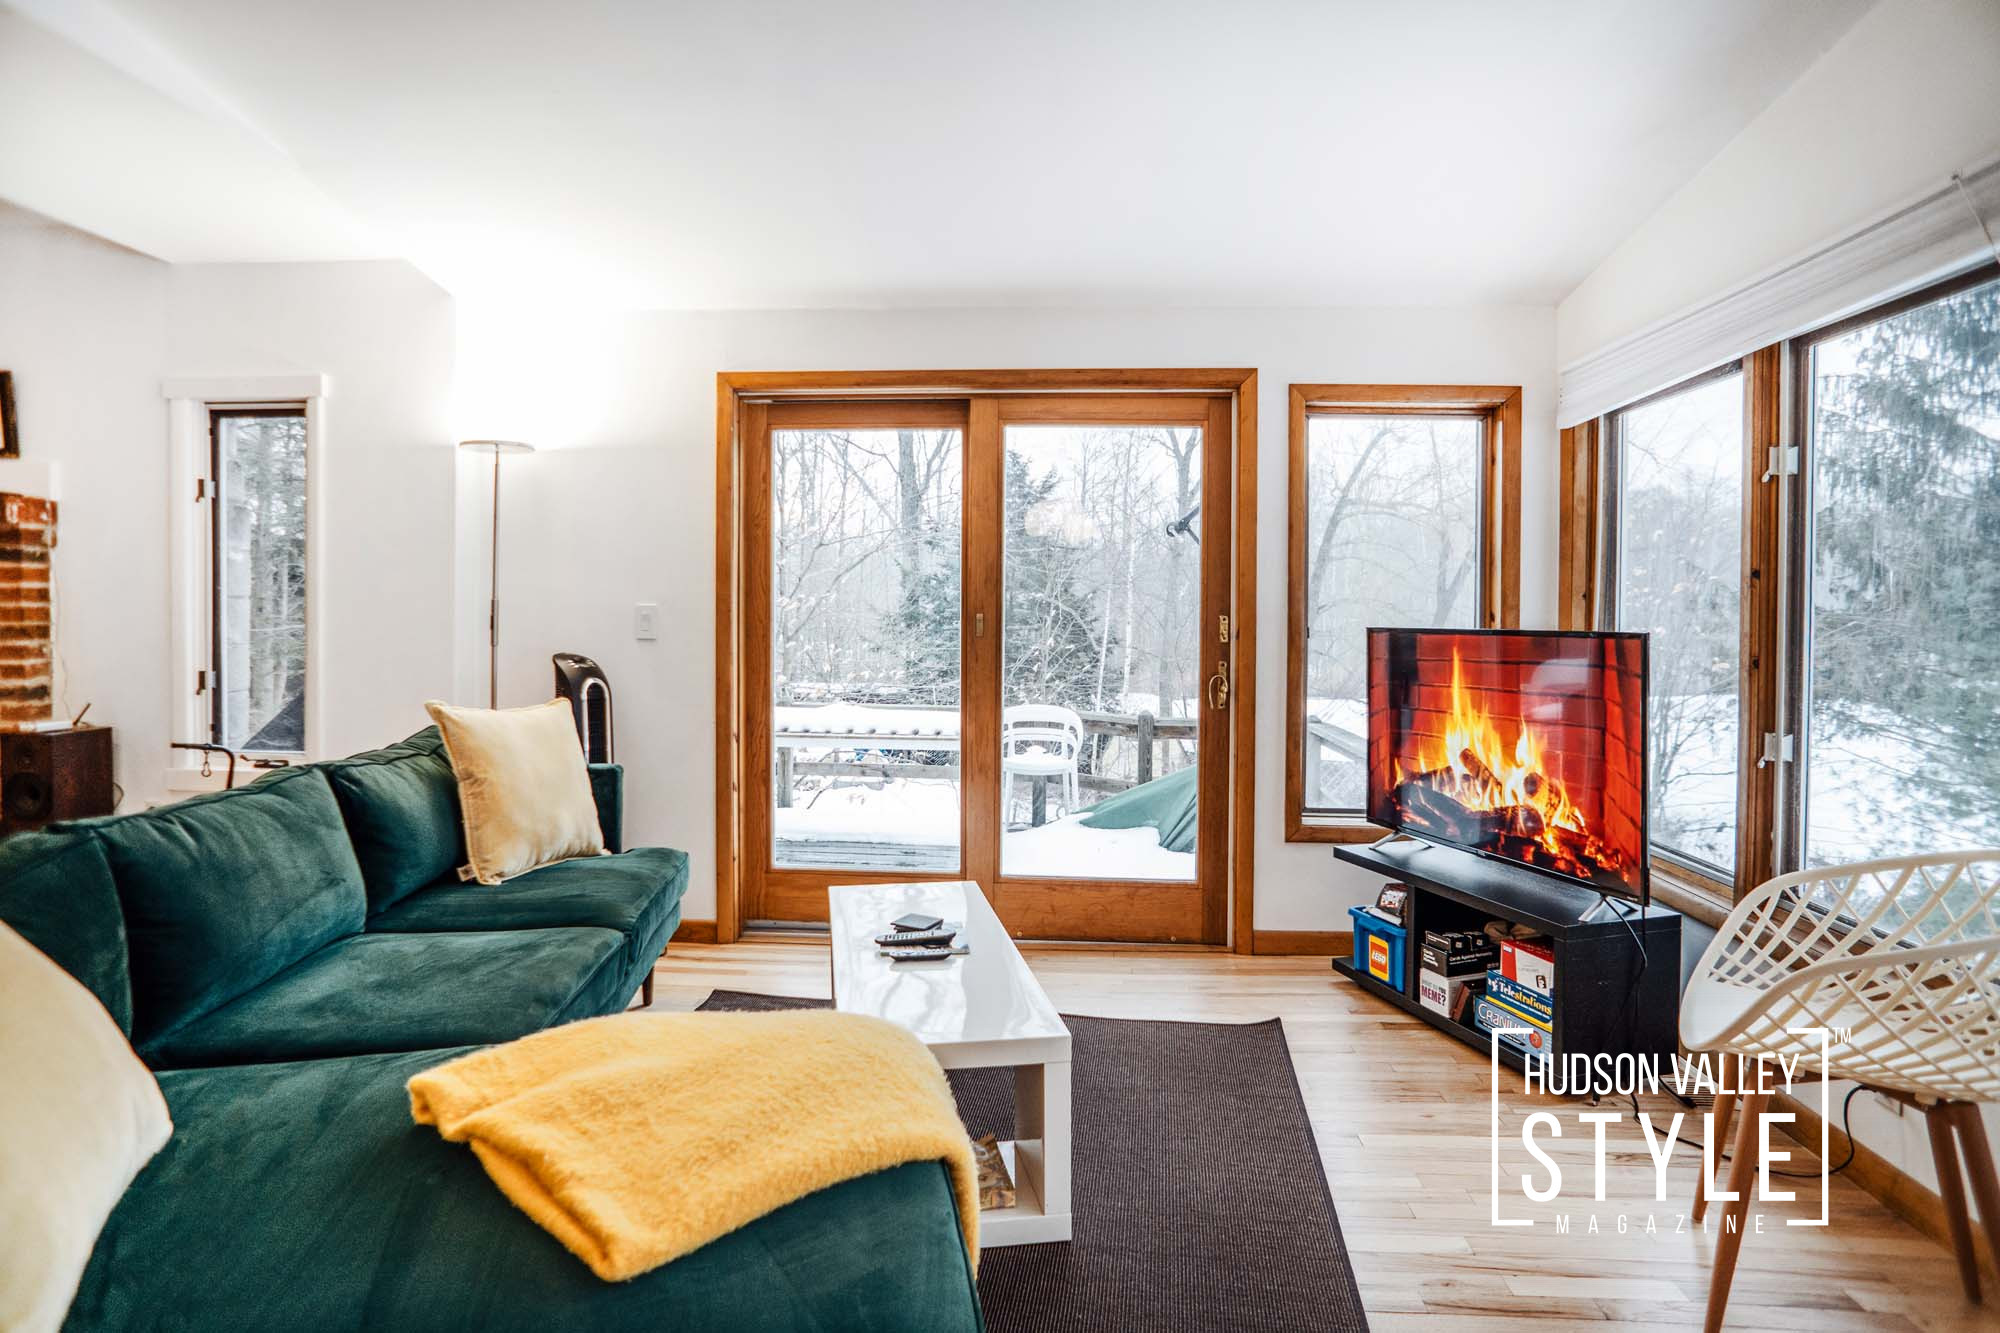 Spend a Weekend away from the City in the Beautiful Pinebush Lake House Spend a Weekend away from the City in the Beautiful Pinebush Lake House – Airbnb / VRBO Photography by Alluvion Real Estate – Photographer Maxwell Alexander – Duncan Avenue Studios